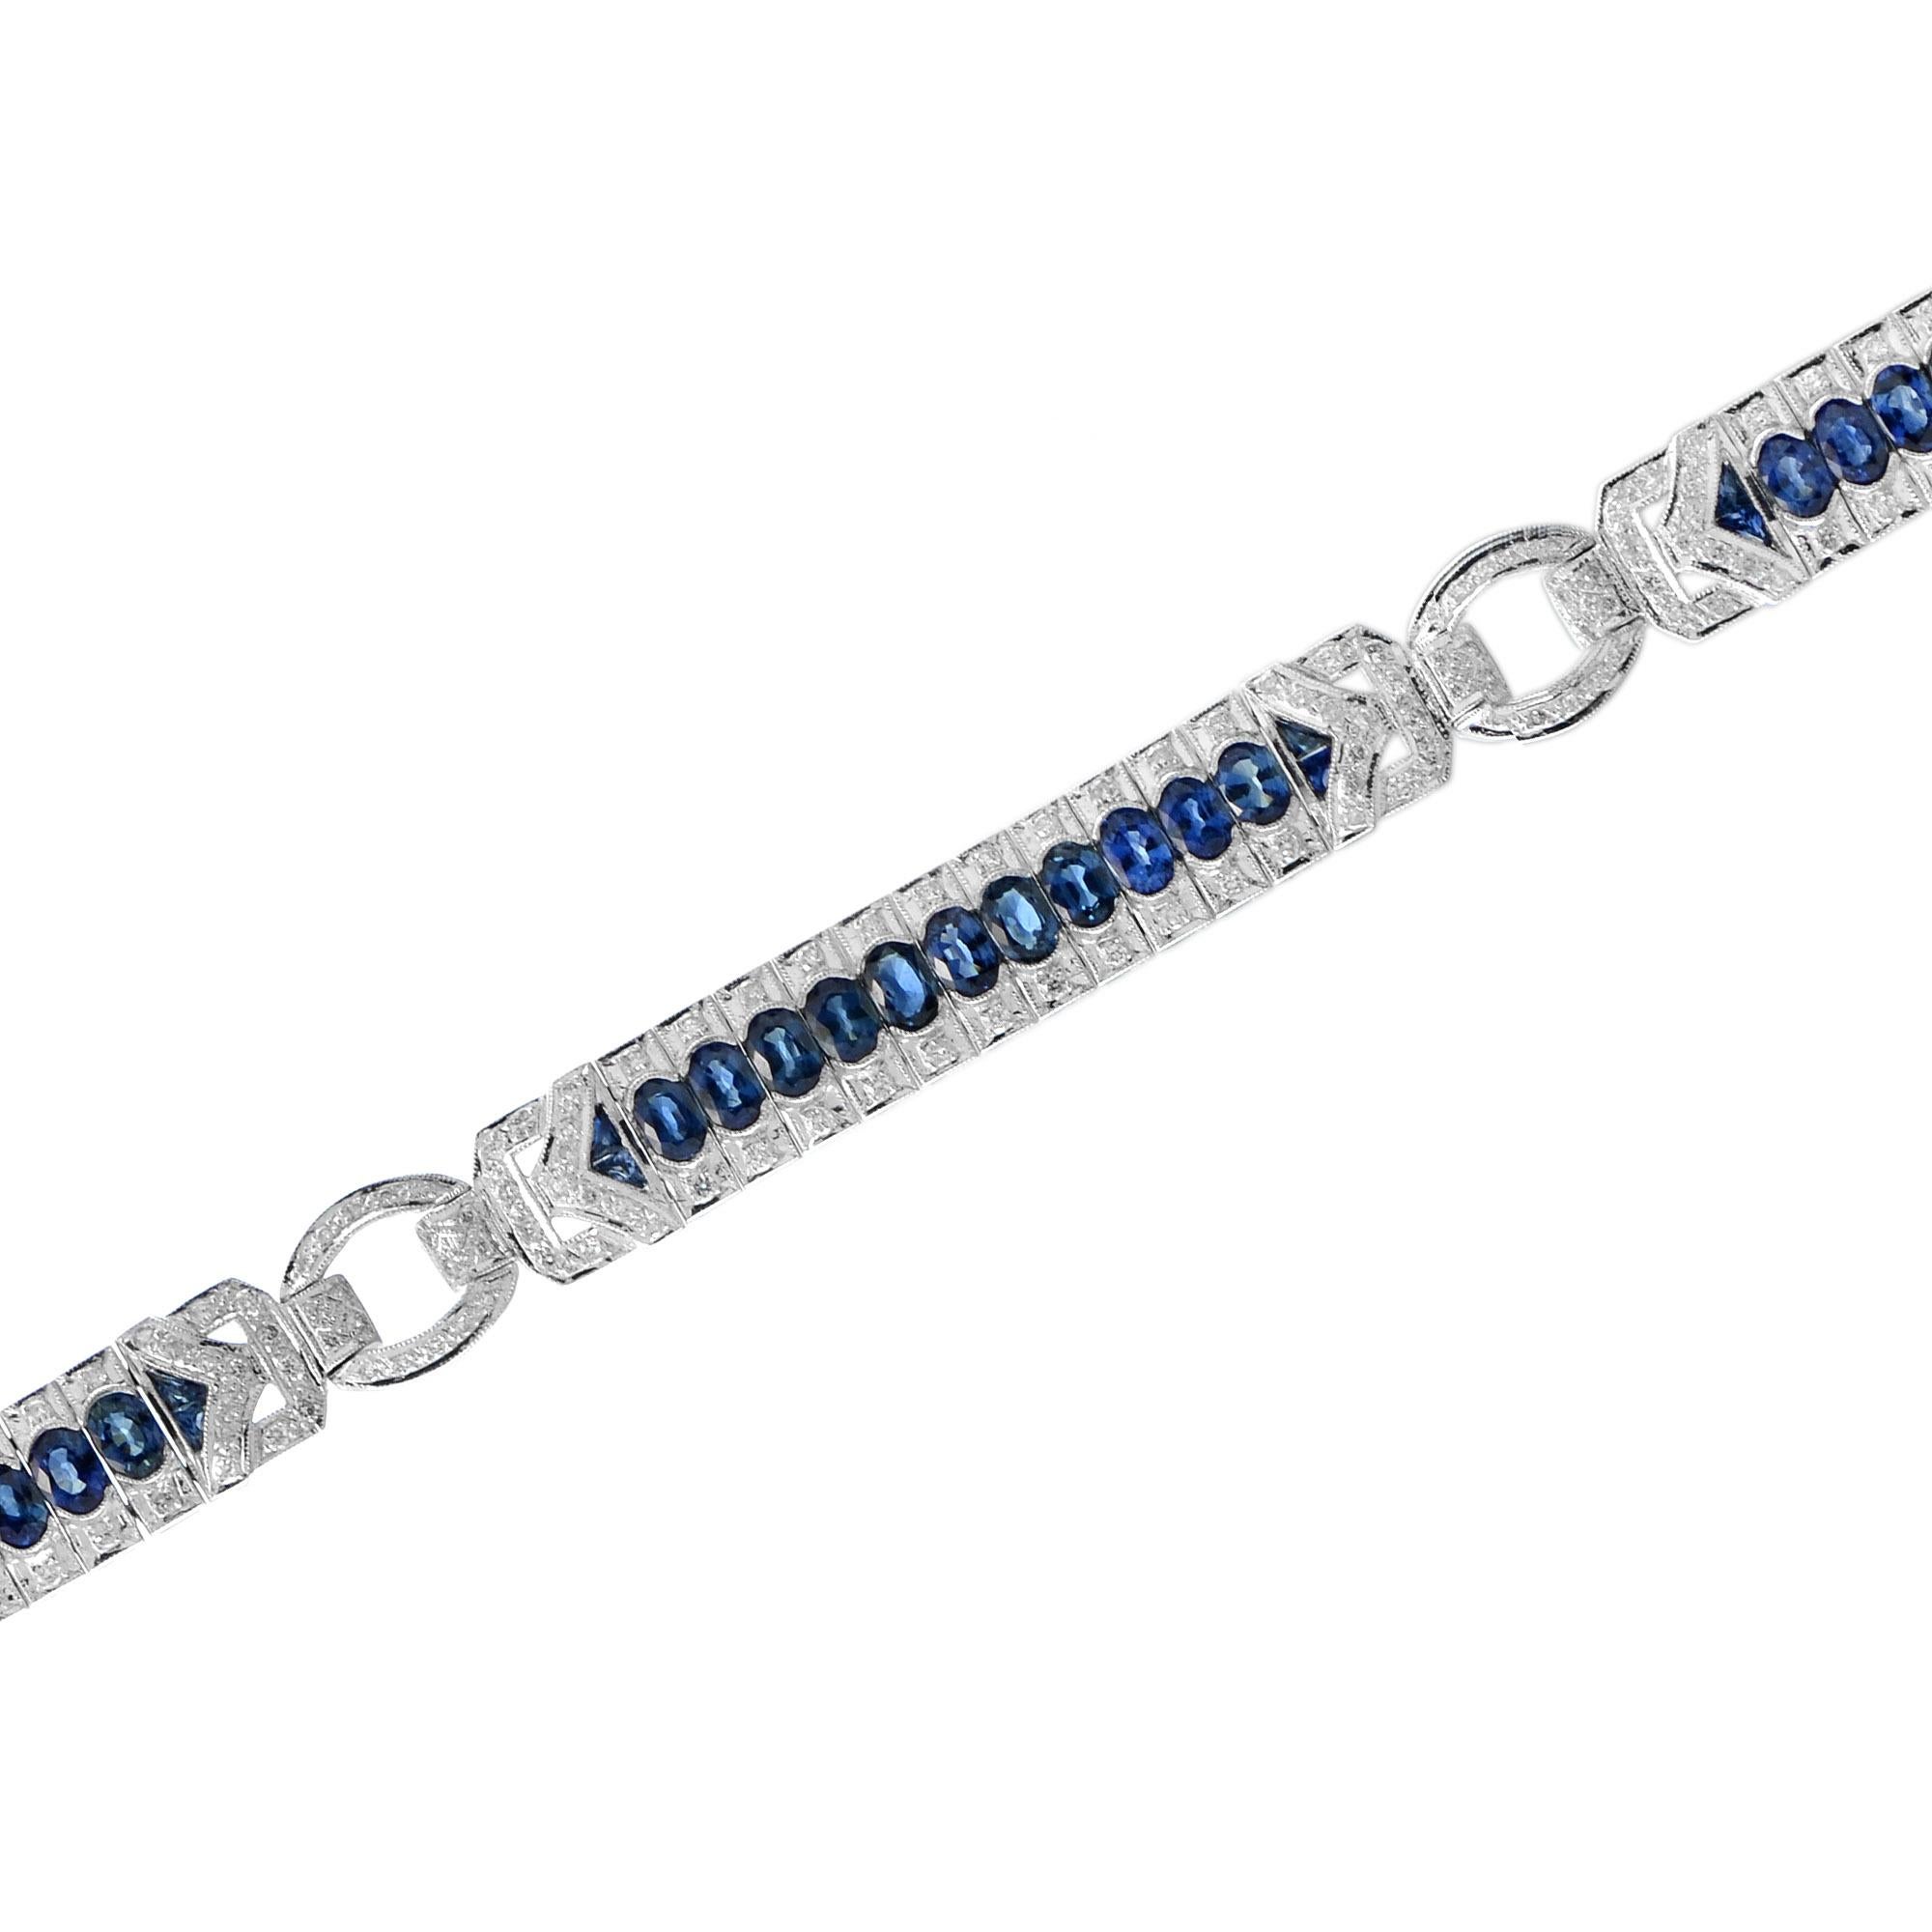 Art Deco 11.52ct. Oval Sapphire and Diamond Bracelet in 18k White Gold For Sale